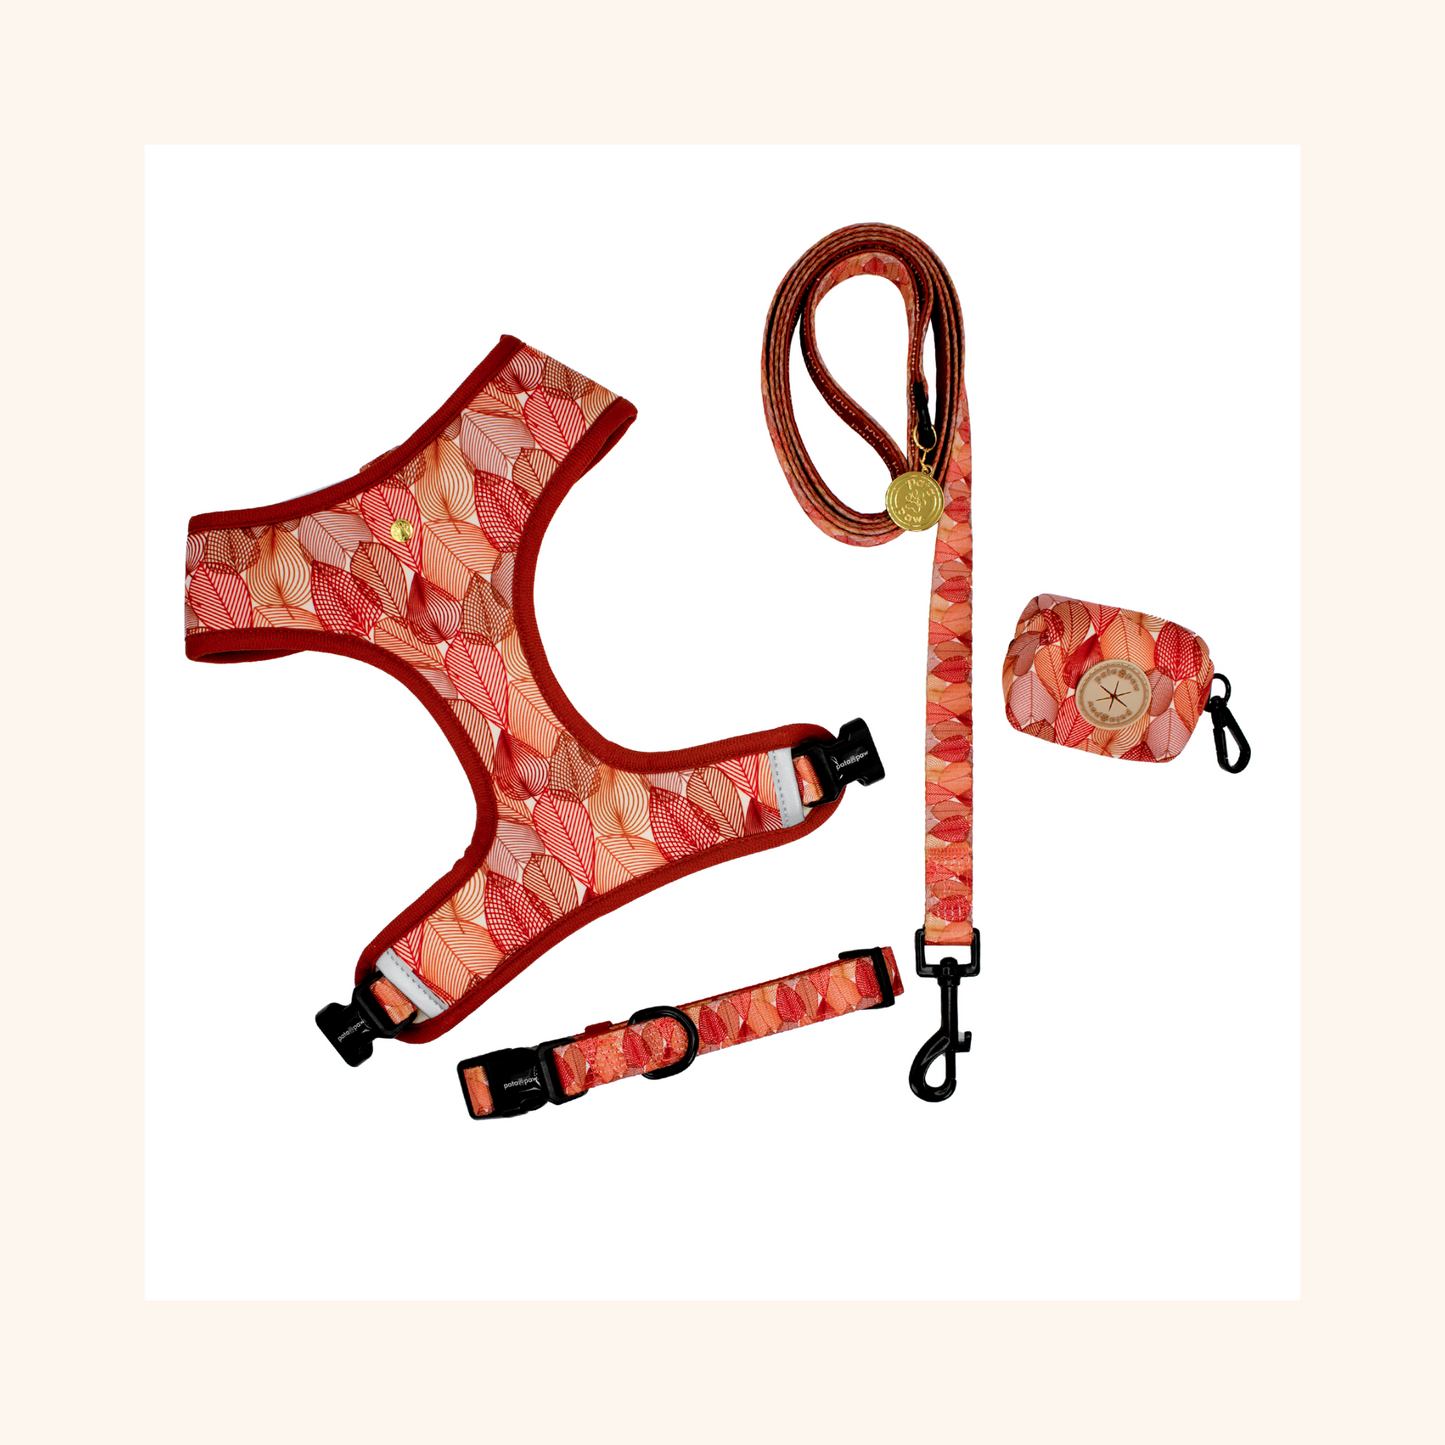 pata paw autumn crunch set: reversible harness, leash, collar, and poop bag holder